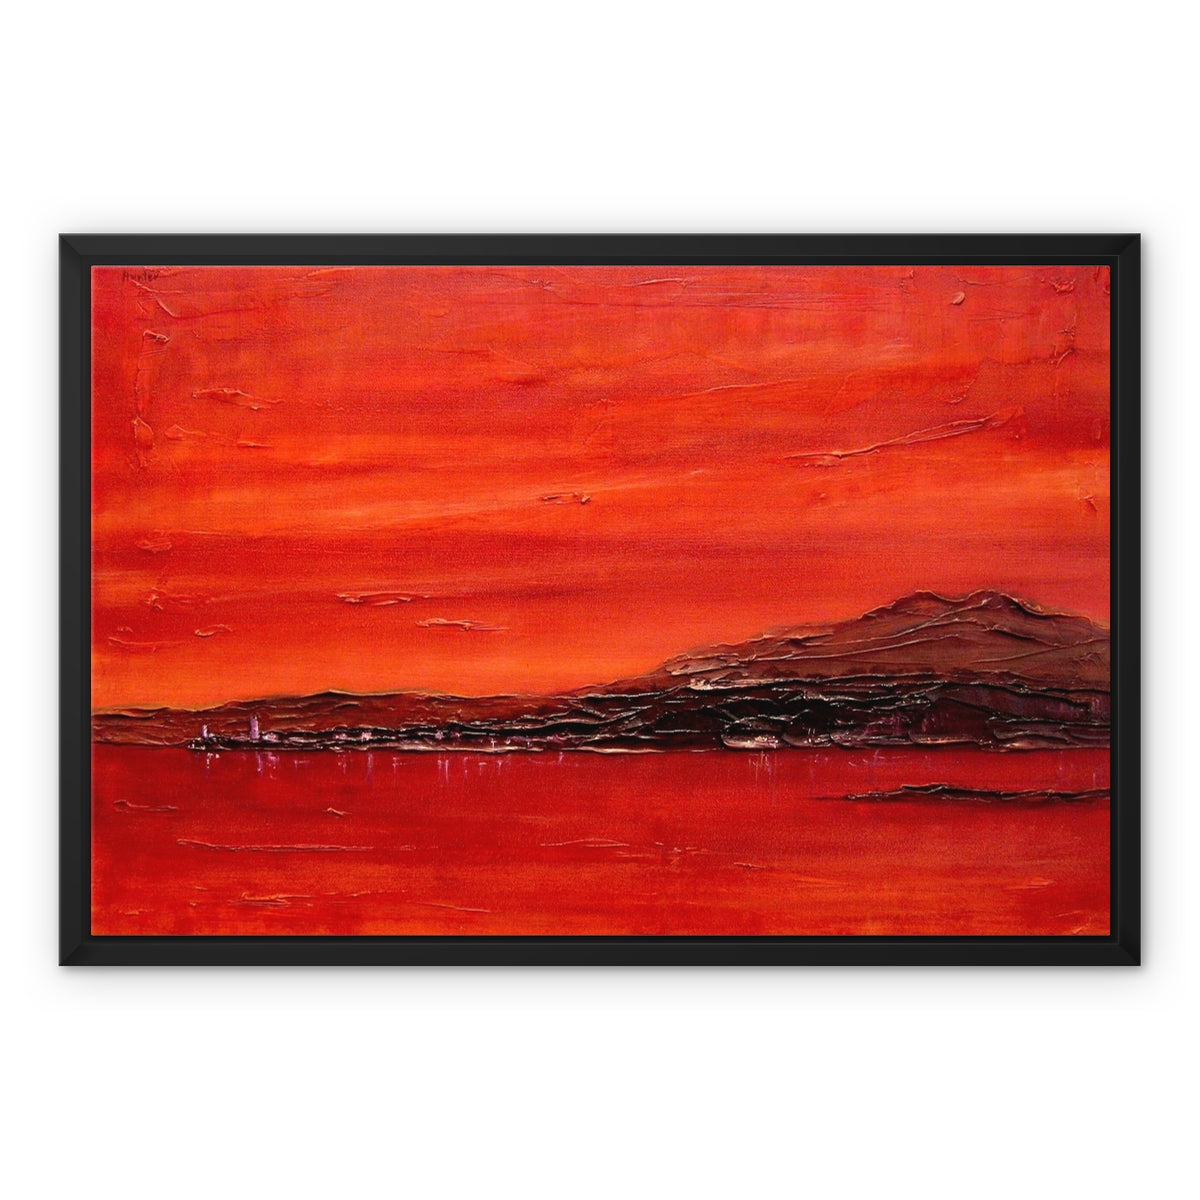 Toward Point Lighthouse Sunset Painting | Framed Canvas From Scotland-Floating Framed Canvas Prints-Arran Art Gallery-24"x18"-Paintings, Prints, Homeware, Art Gifts From Scotland By Scottish Artist Kevin Hunter